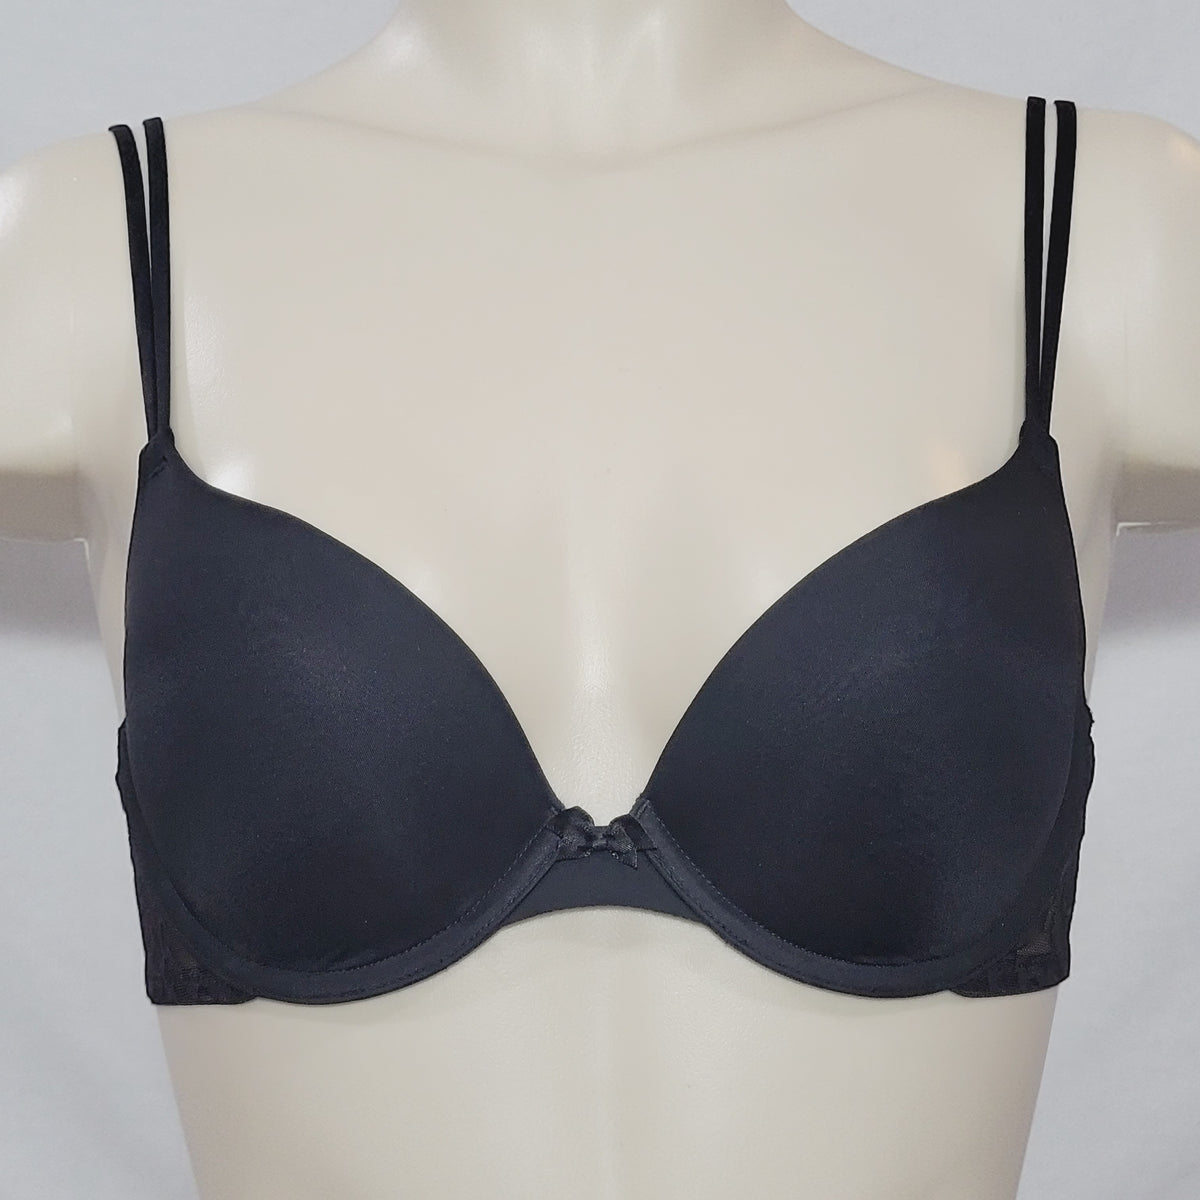 DKNY Signature Lace Underwire Bra (DK1024L) 36C/Skinny Dip/Nude at